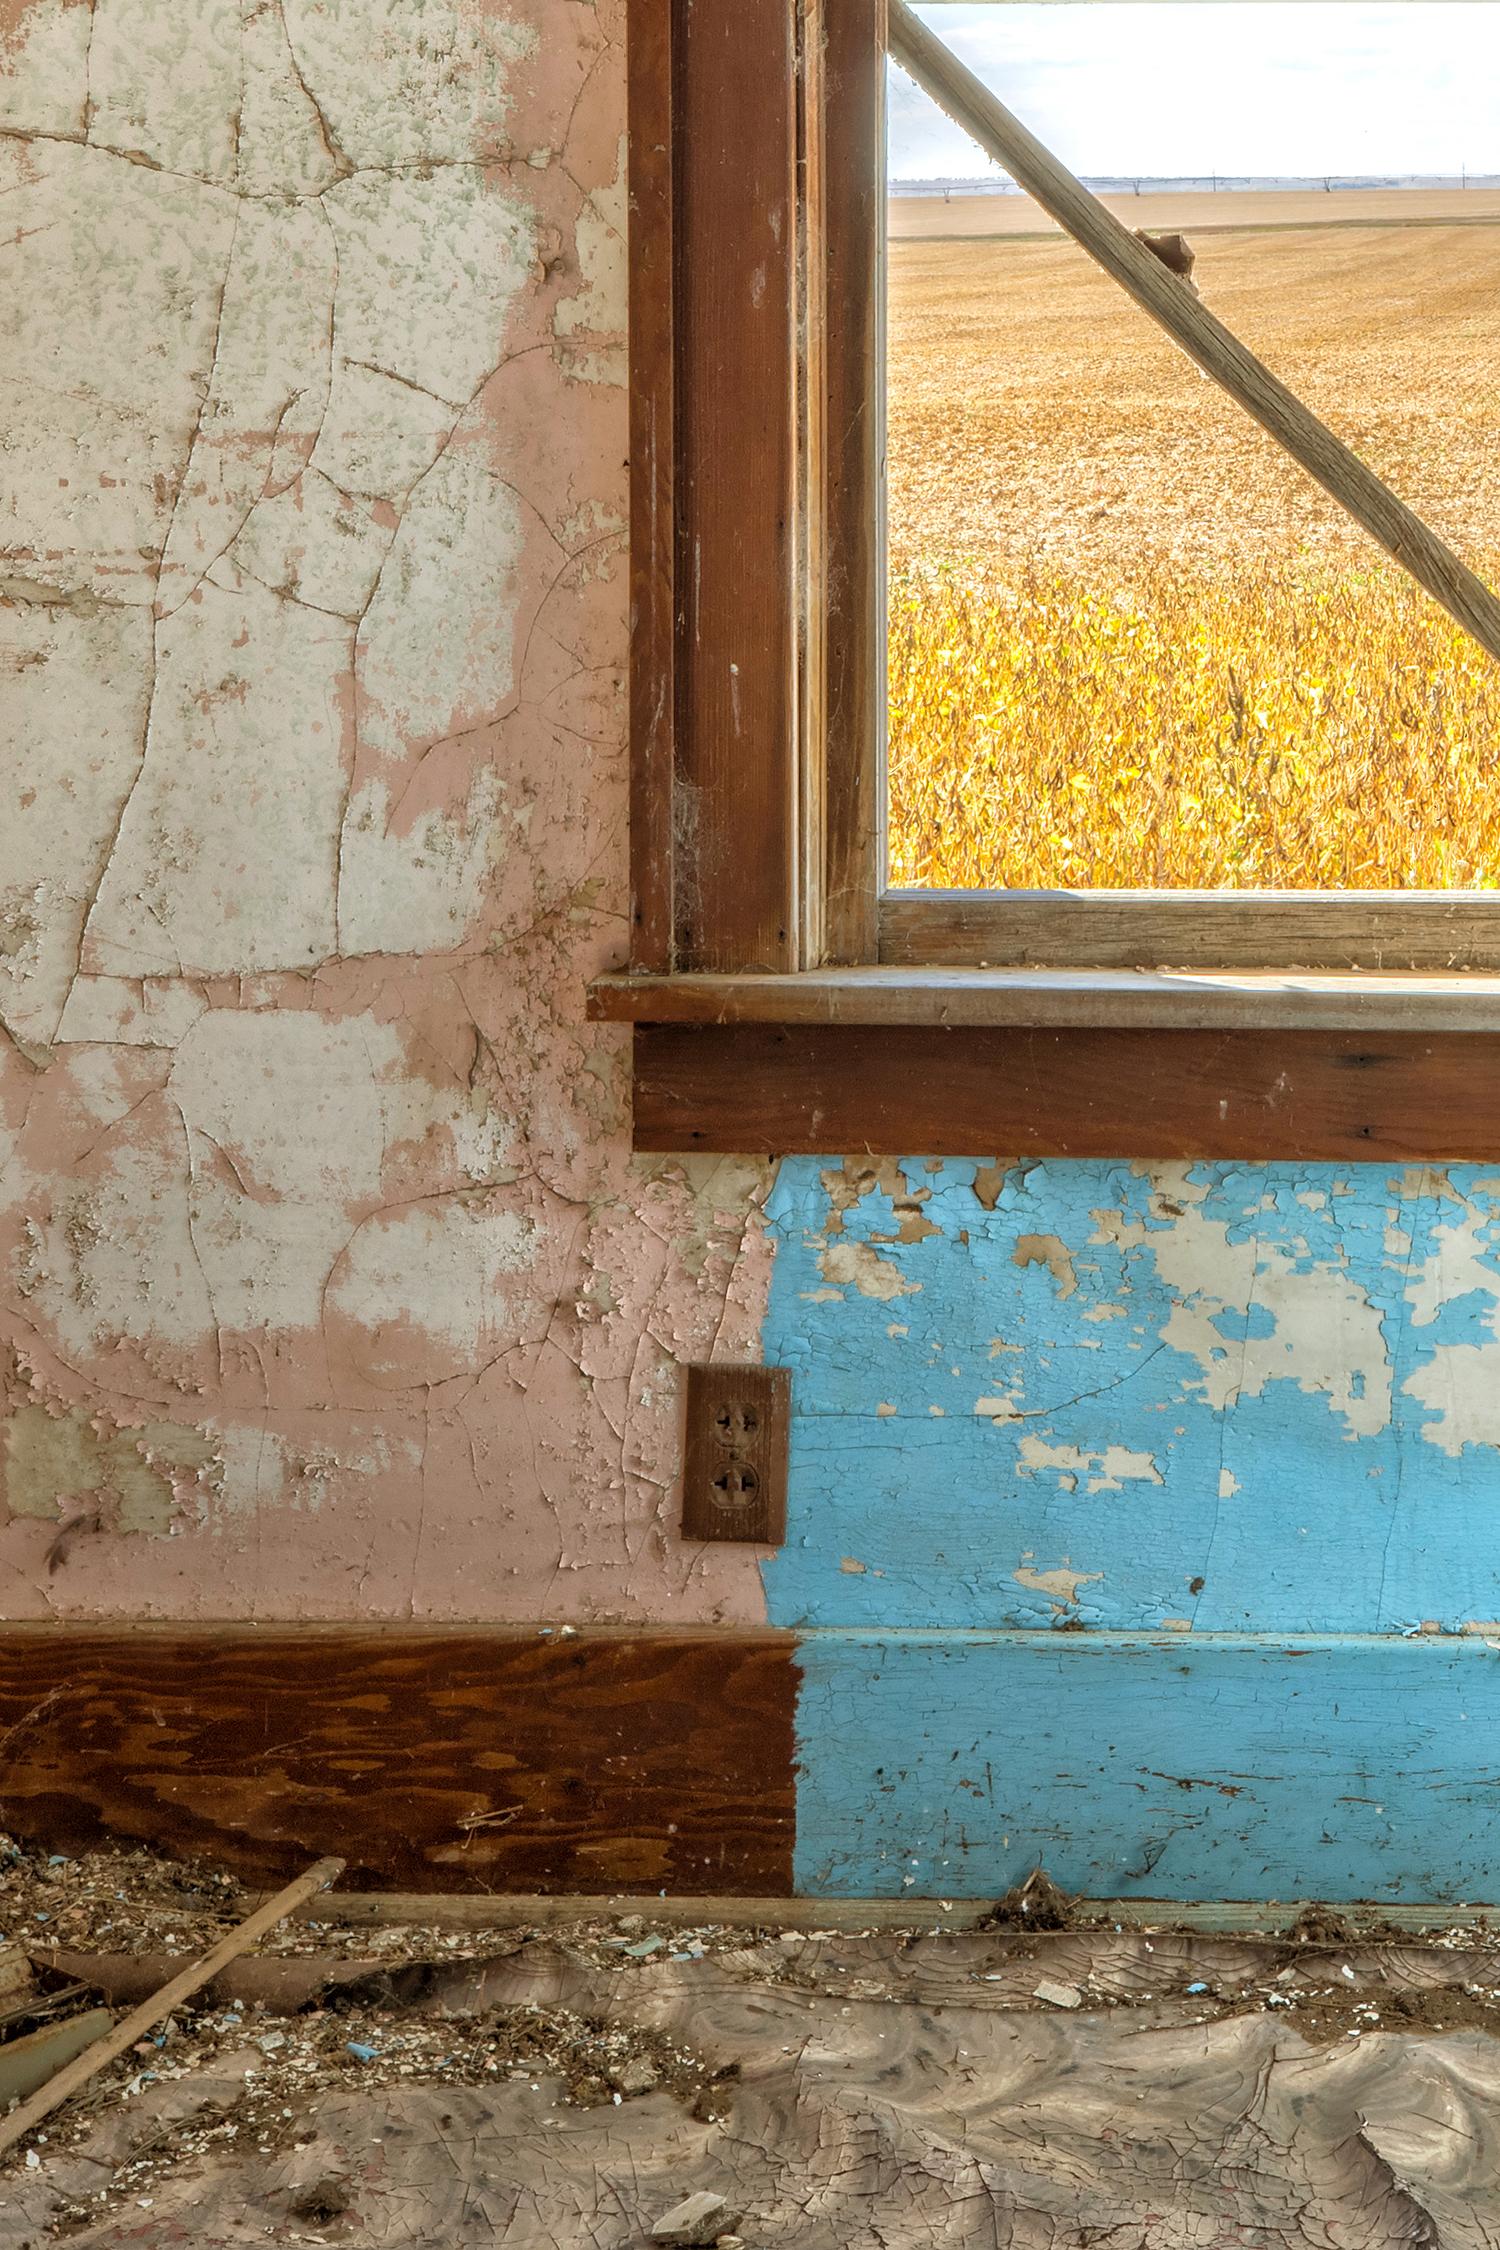 Rebecca Skinner’s “Interior V” is a 18 x 12 inch color photograph taken from inside an abandoned farmhouse in North Dakota. A crooked window in a house in ruin looks out to a field in the beautiful landscape with colors of blue, pink, yellow and